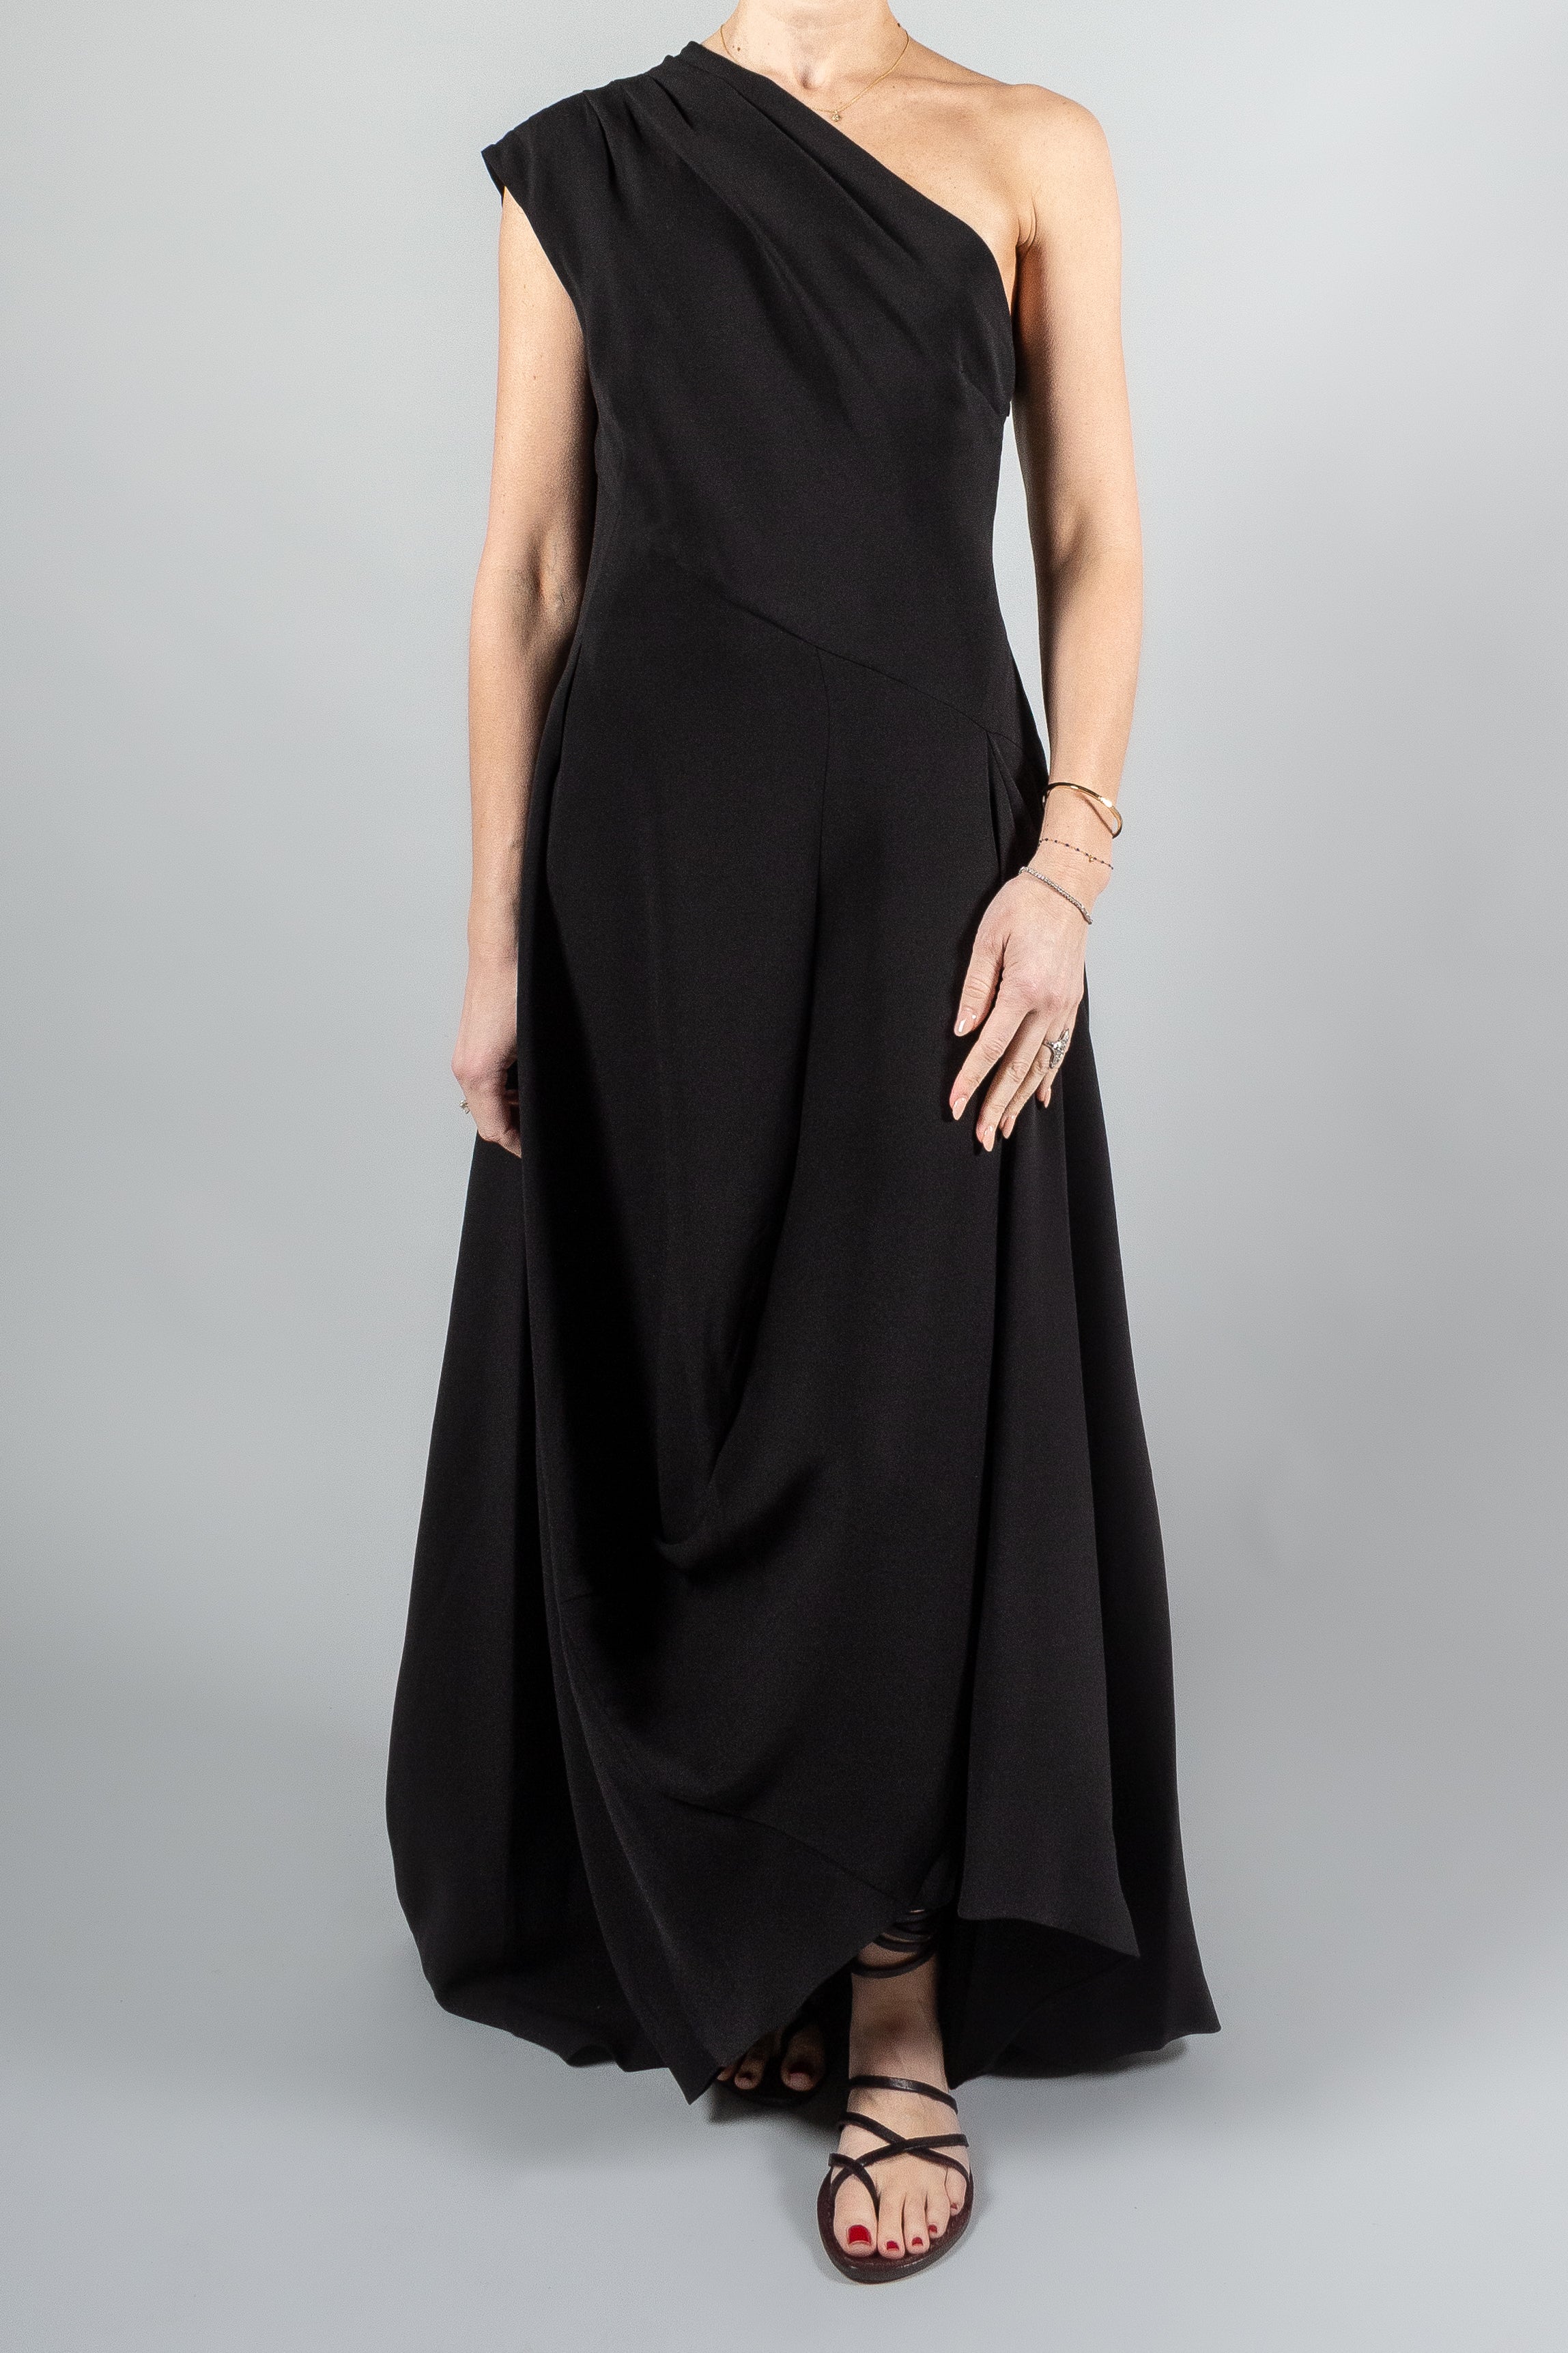 Heirlome Sara Dress-Dresses and Jumpsuits-Misch-Boutique-Vancouver-Canada-misch.ca